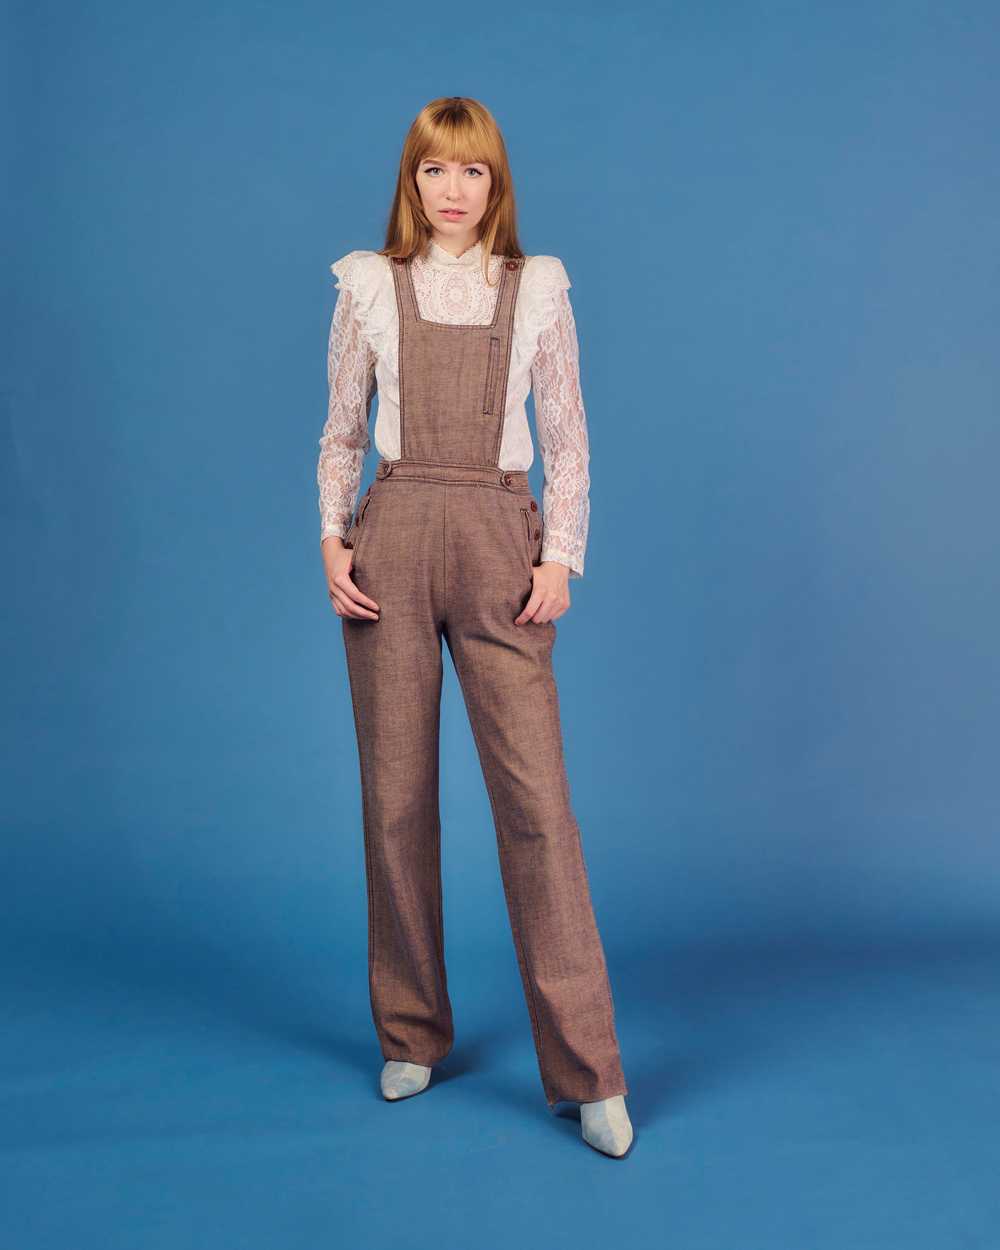 70's Faded Glory Overalls - image 1